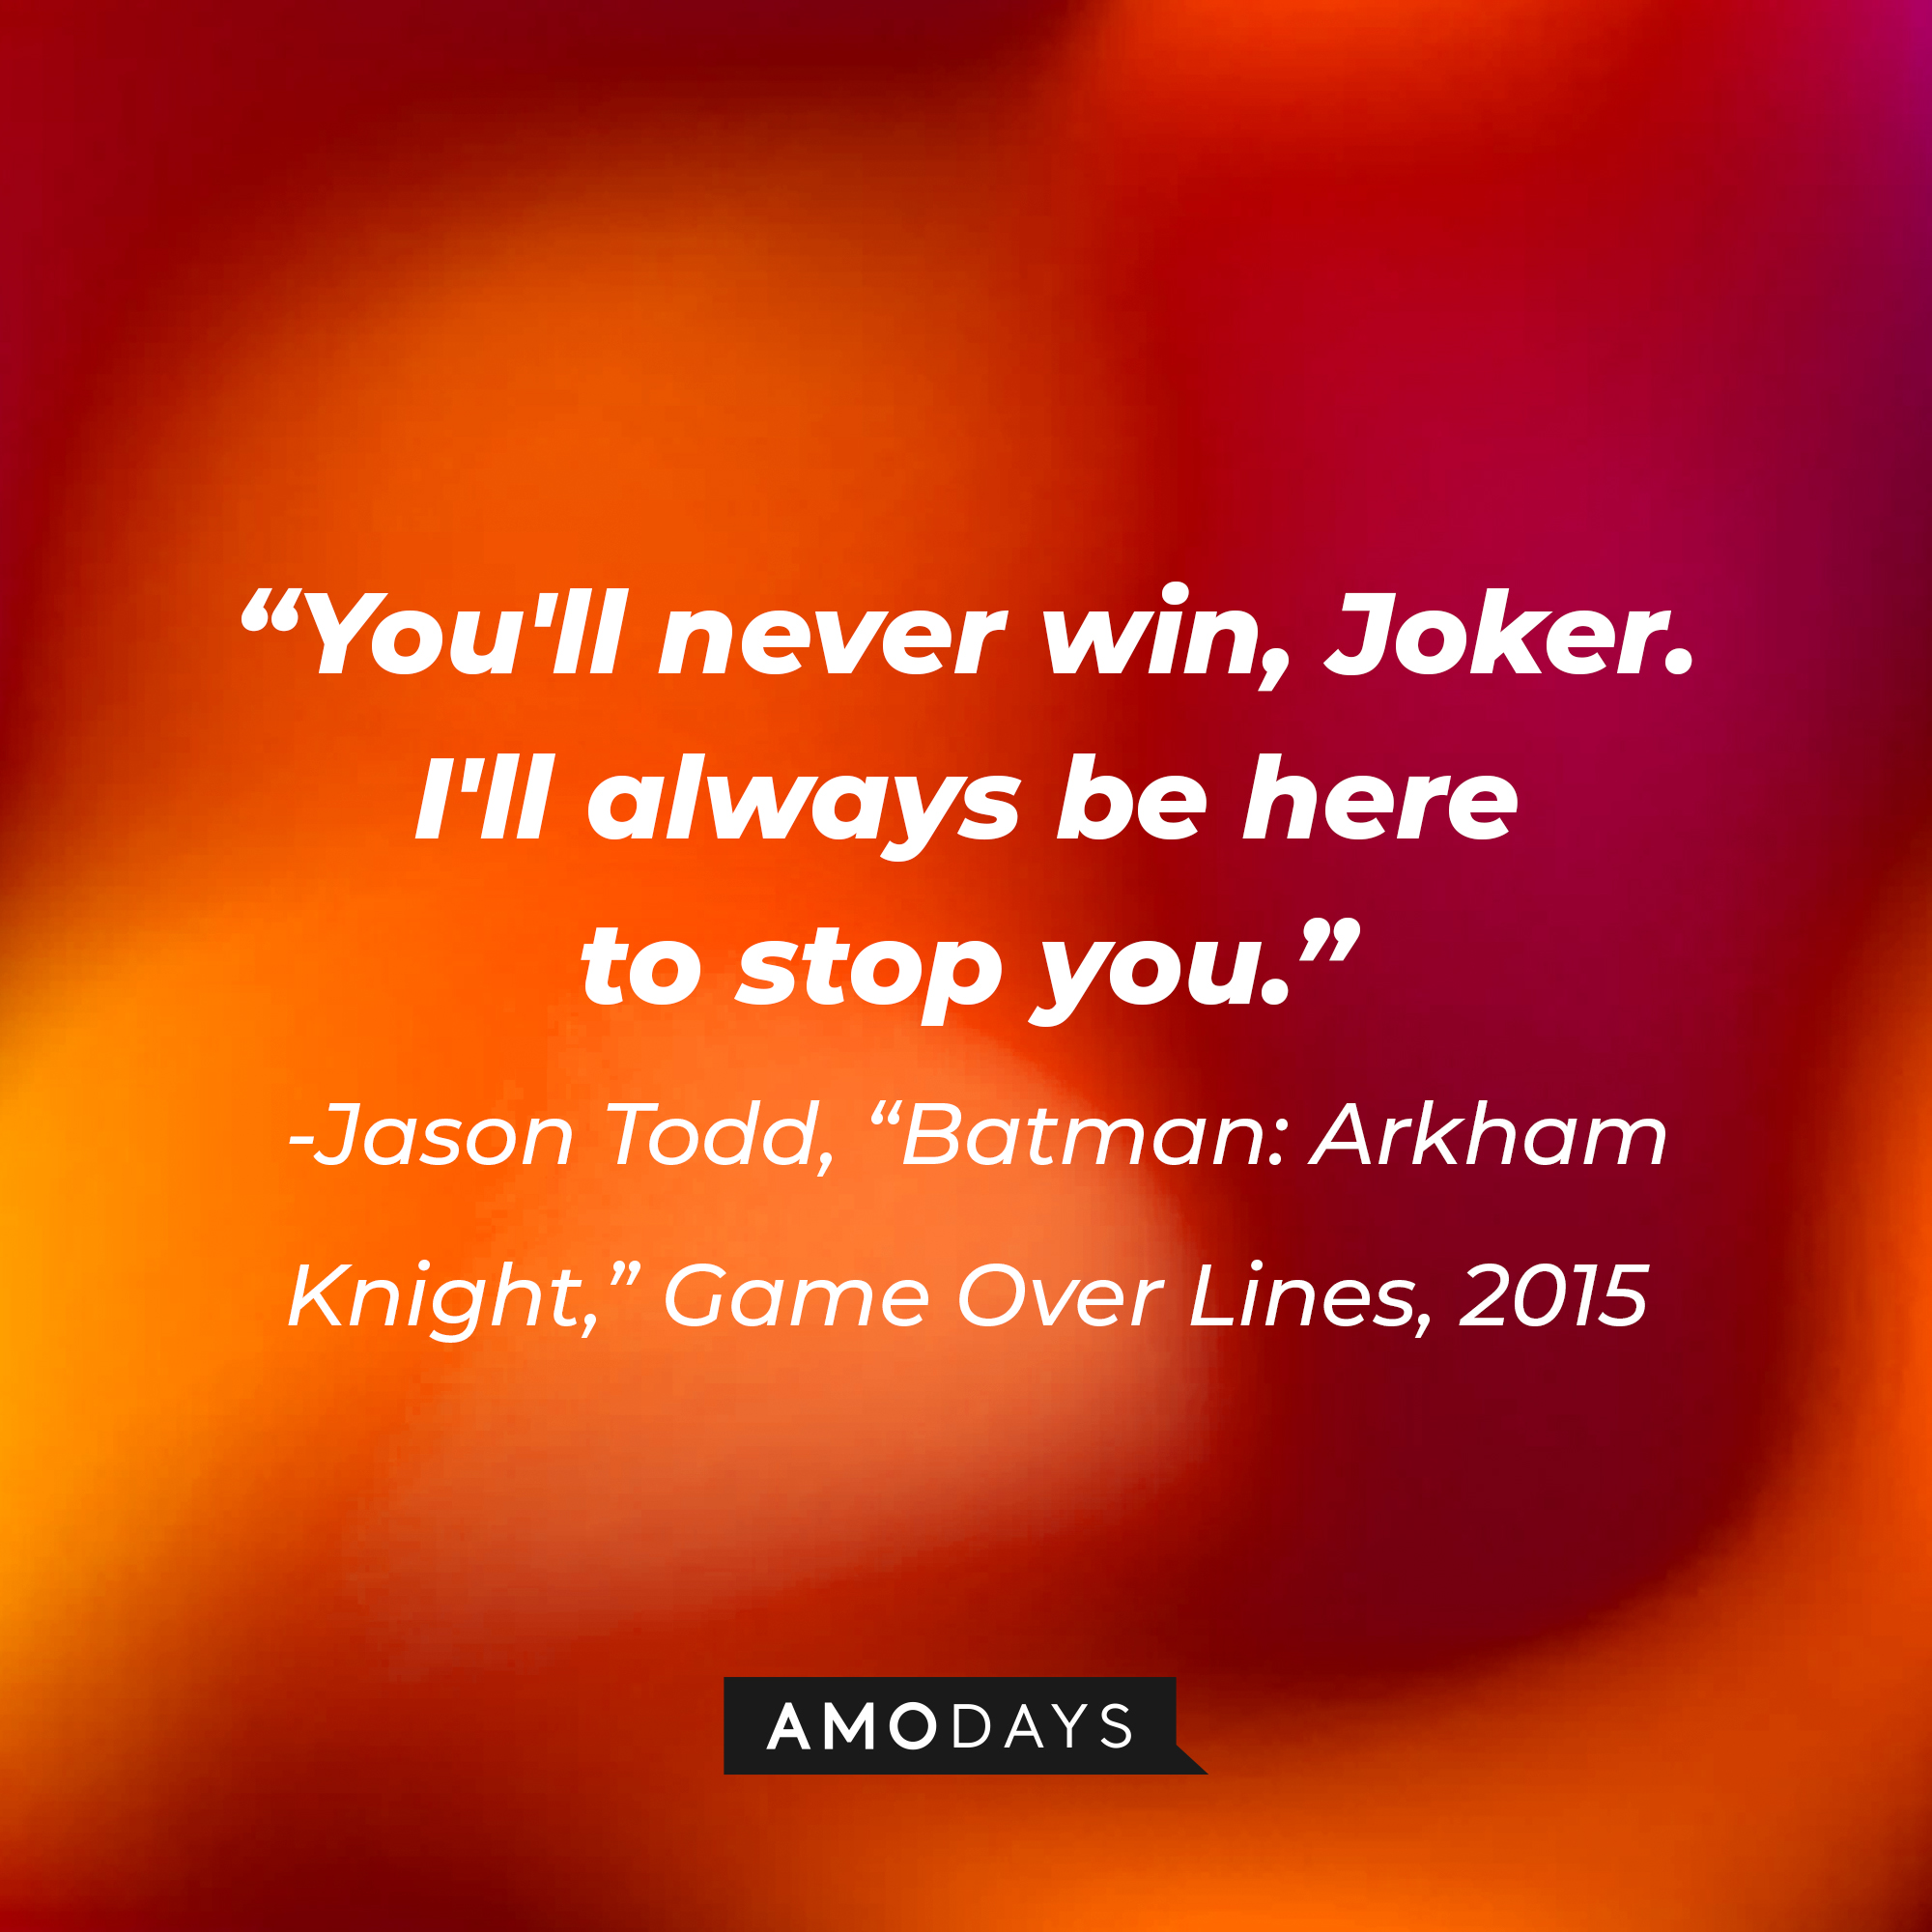 A quote from Jason Todd in "Batman: Arkham Knight," Game Over Lines, 2015: "You'll never win, Joker. I'll always be here to stop you." | Source: AmoDays